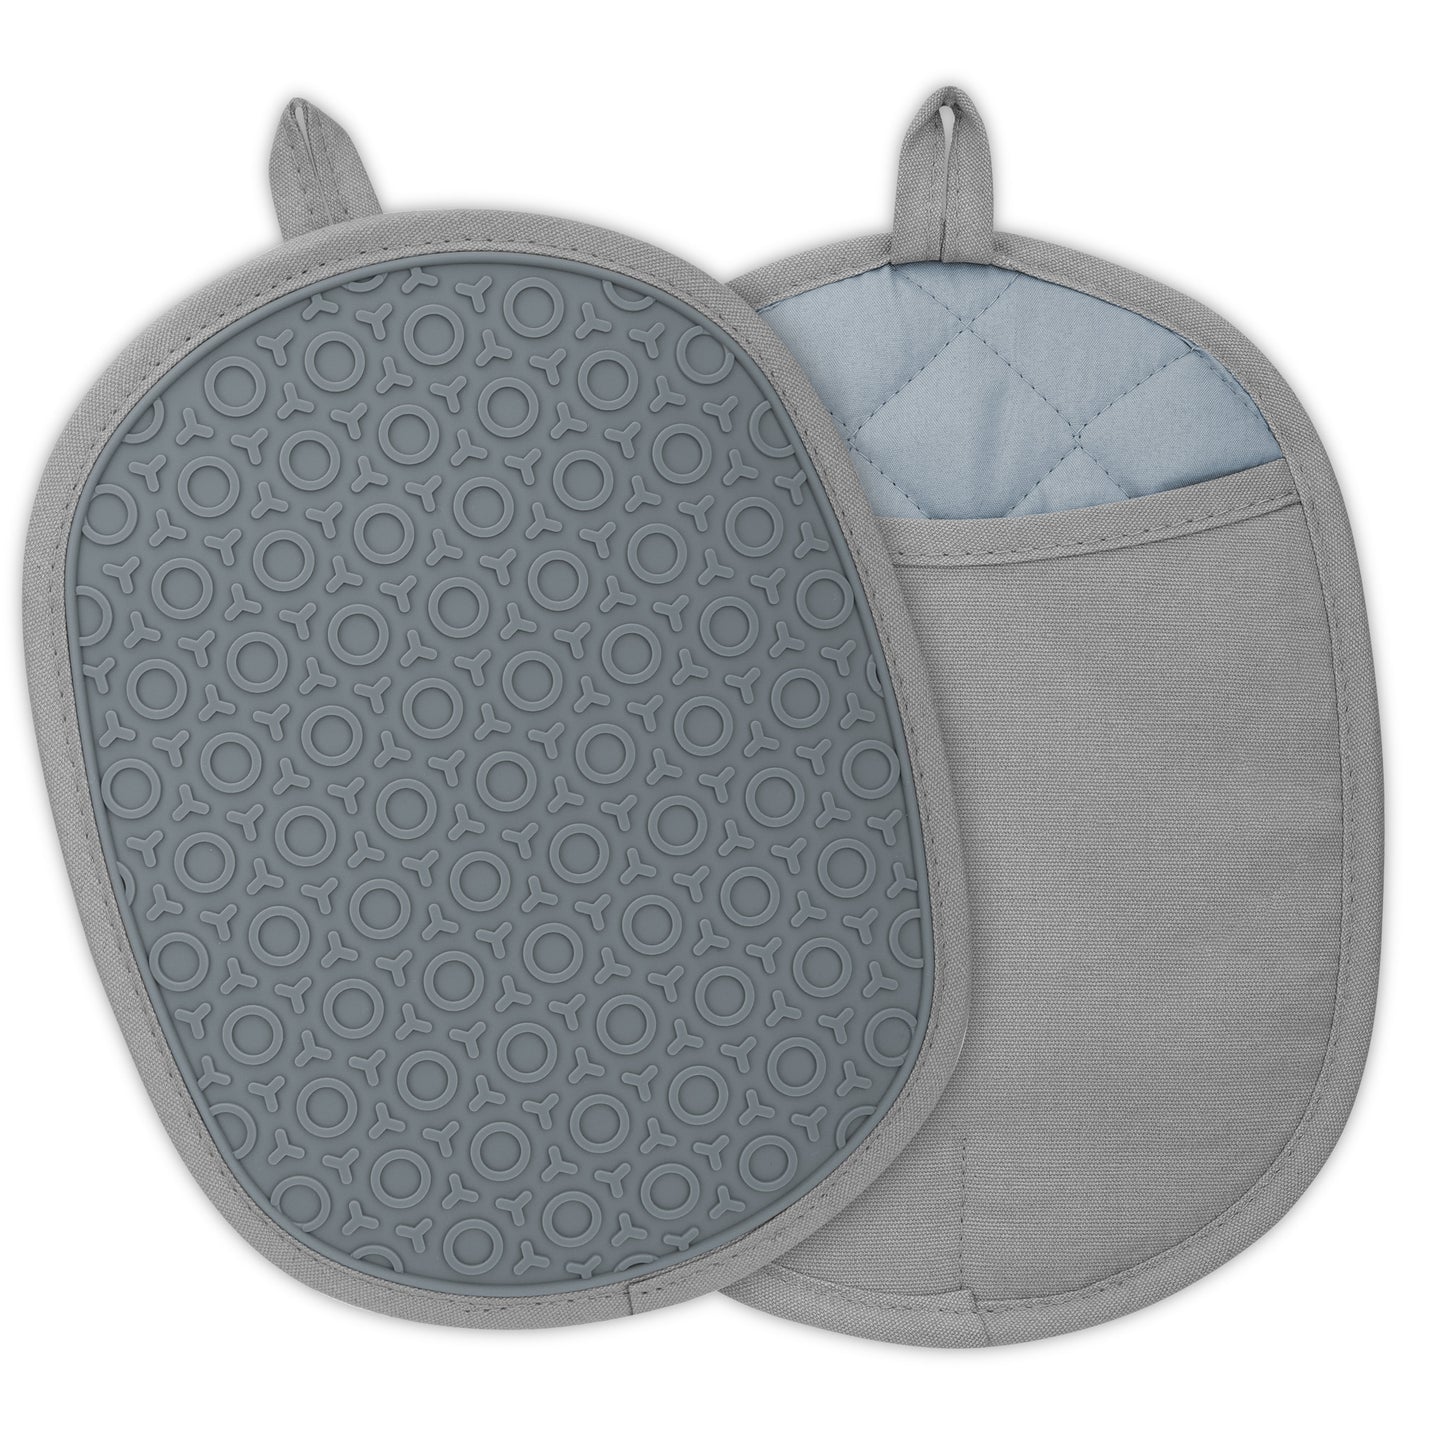 2pcs Silicone Pot Holders- Heat-Resistant Pads with Secure Pockets and Non-Slip Grip for Safe Baking and  Cooking(Gray)